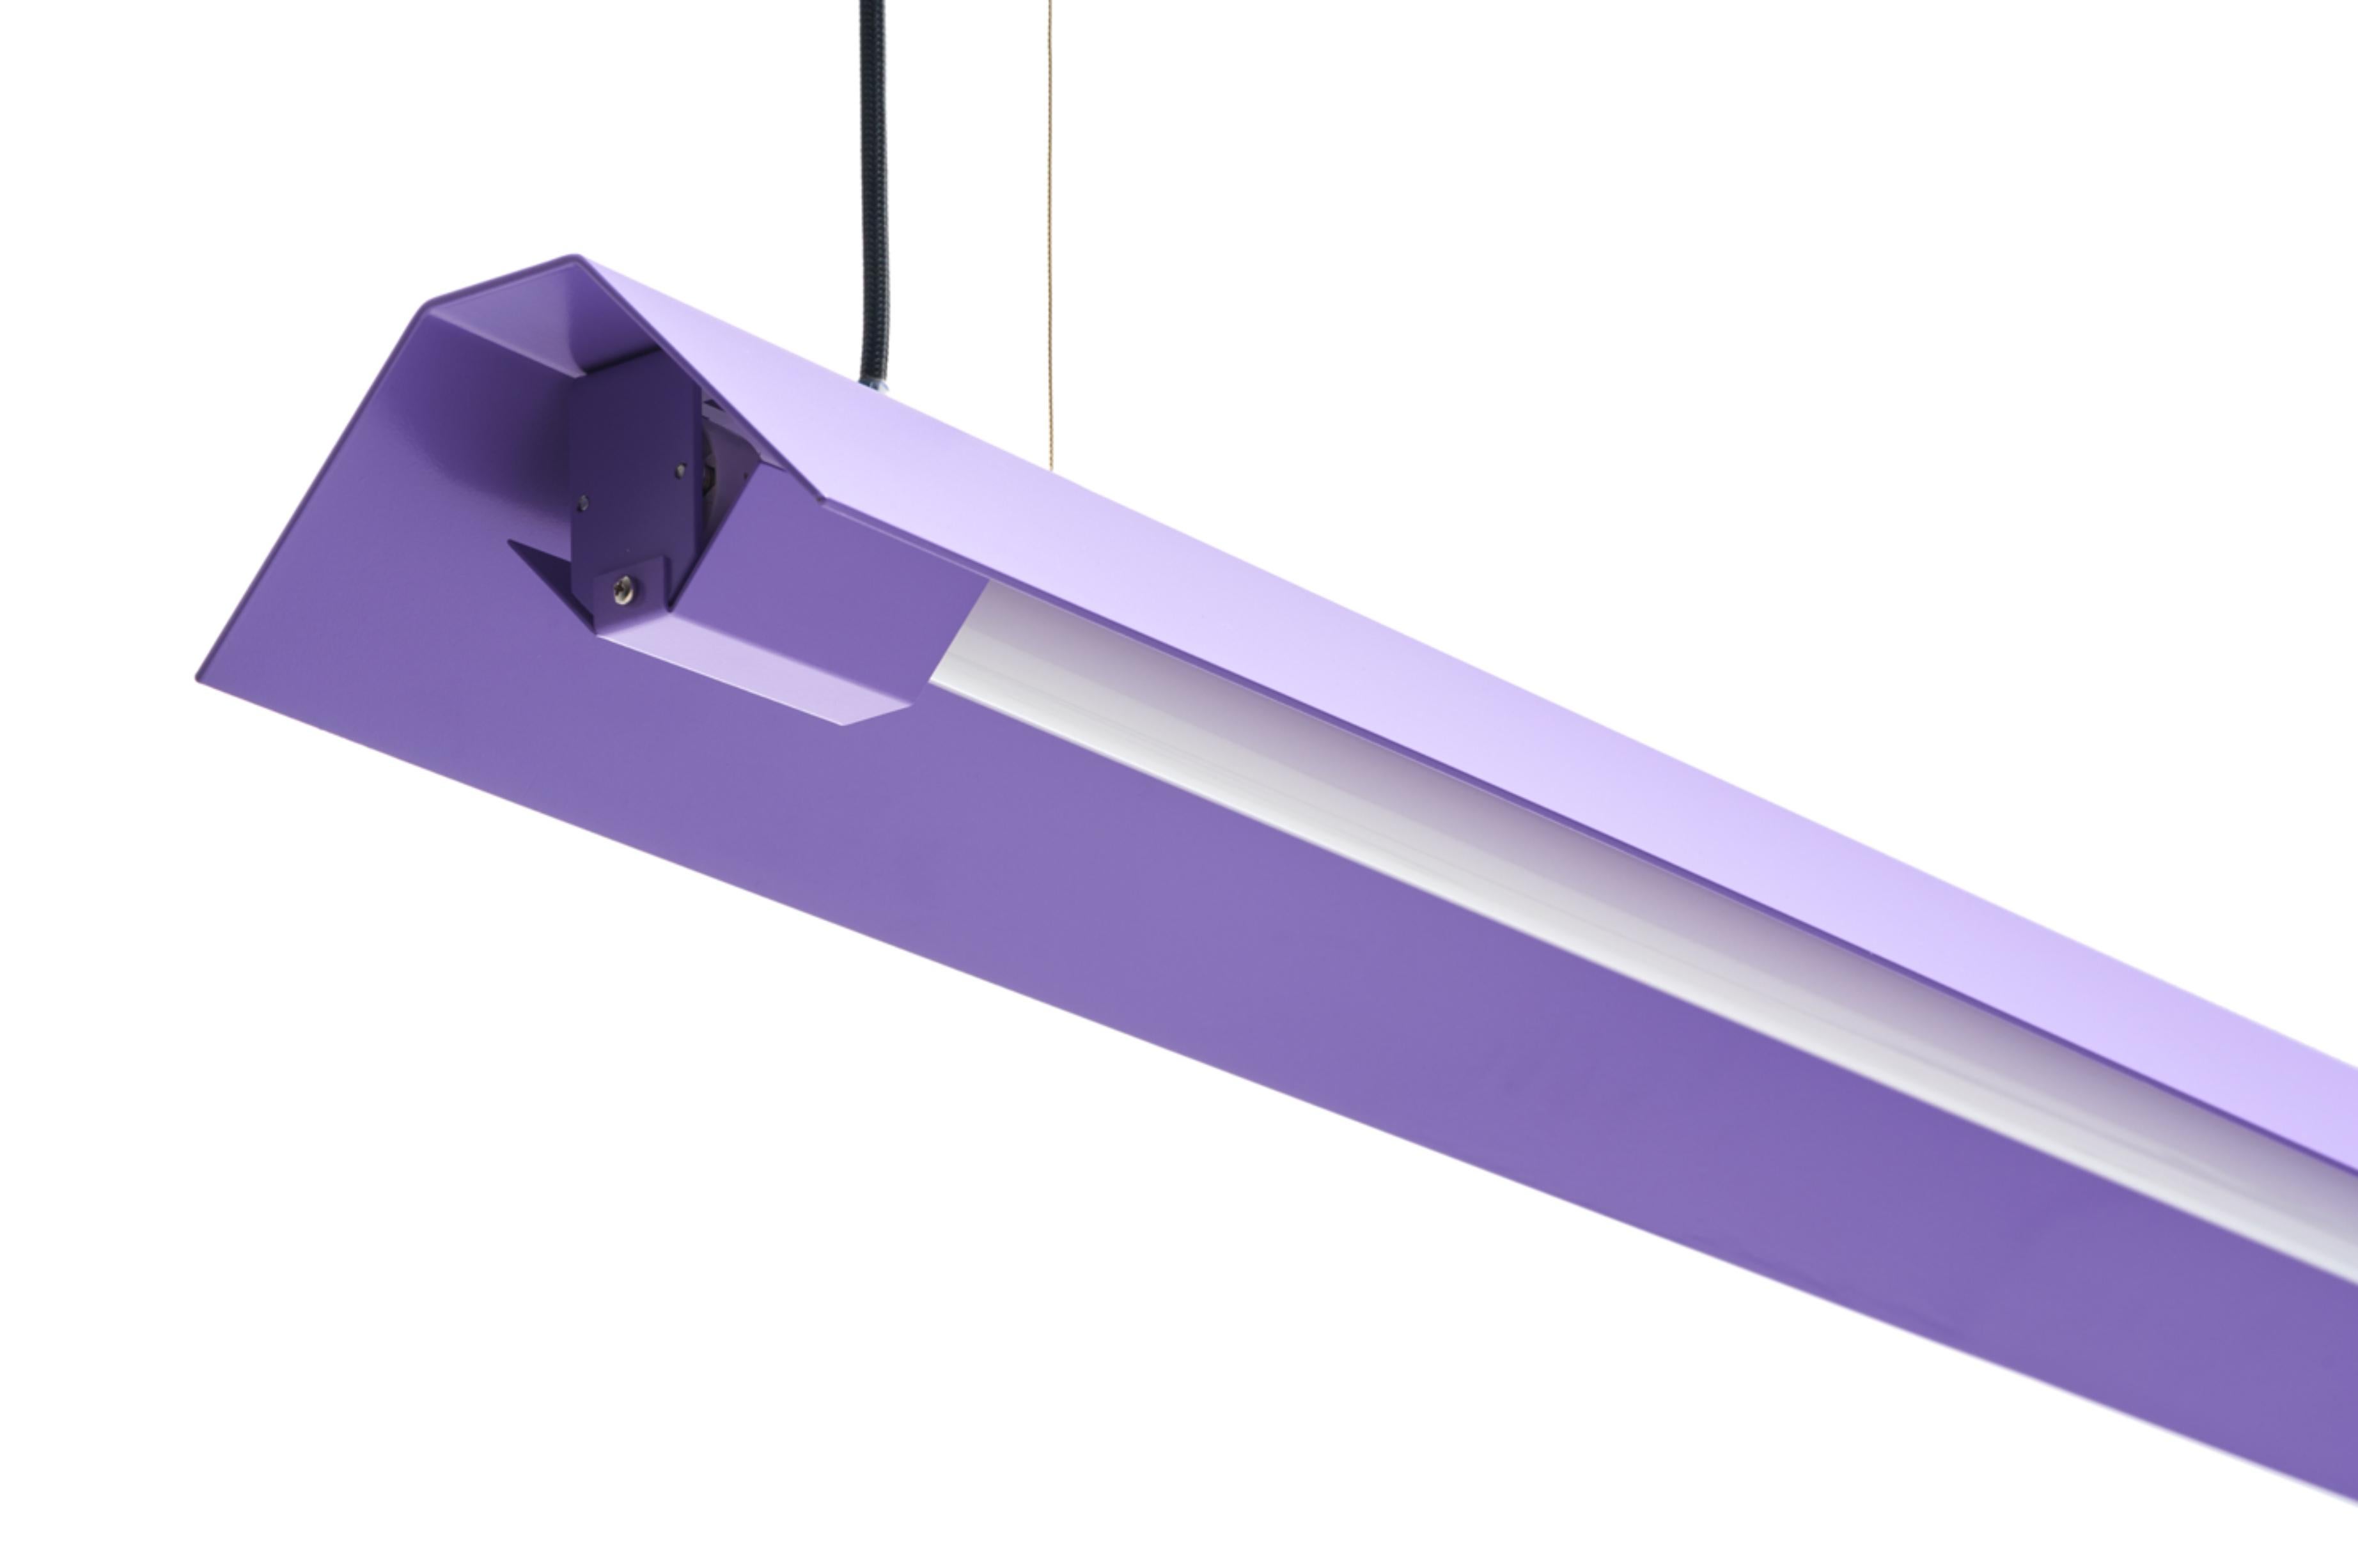 Extra Large Misalliance Ral lavender suspended light by Lexavala
Dimensions: D 16 x W 160 x H 8 cm
Materials: powder coated aluminium.

There are two lenghts of socket covers, extending over the LED. Two short are to be found in Suspended and